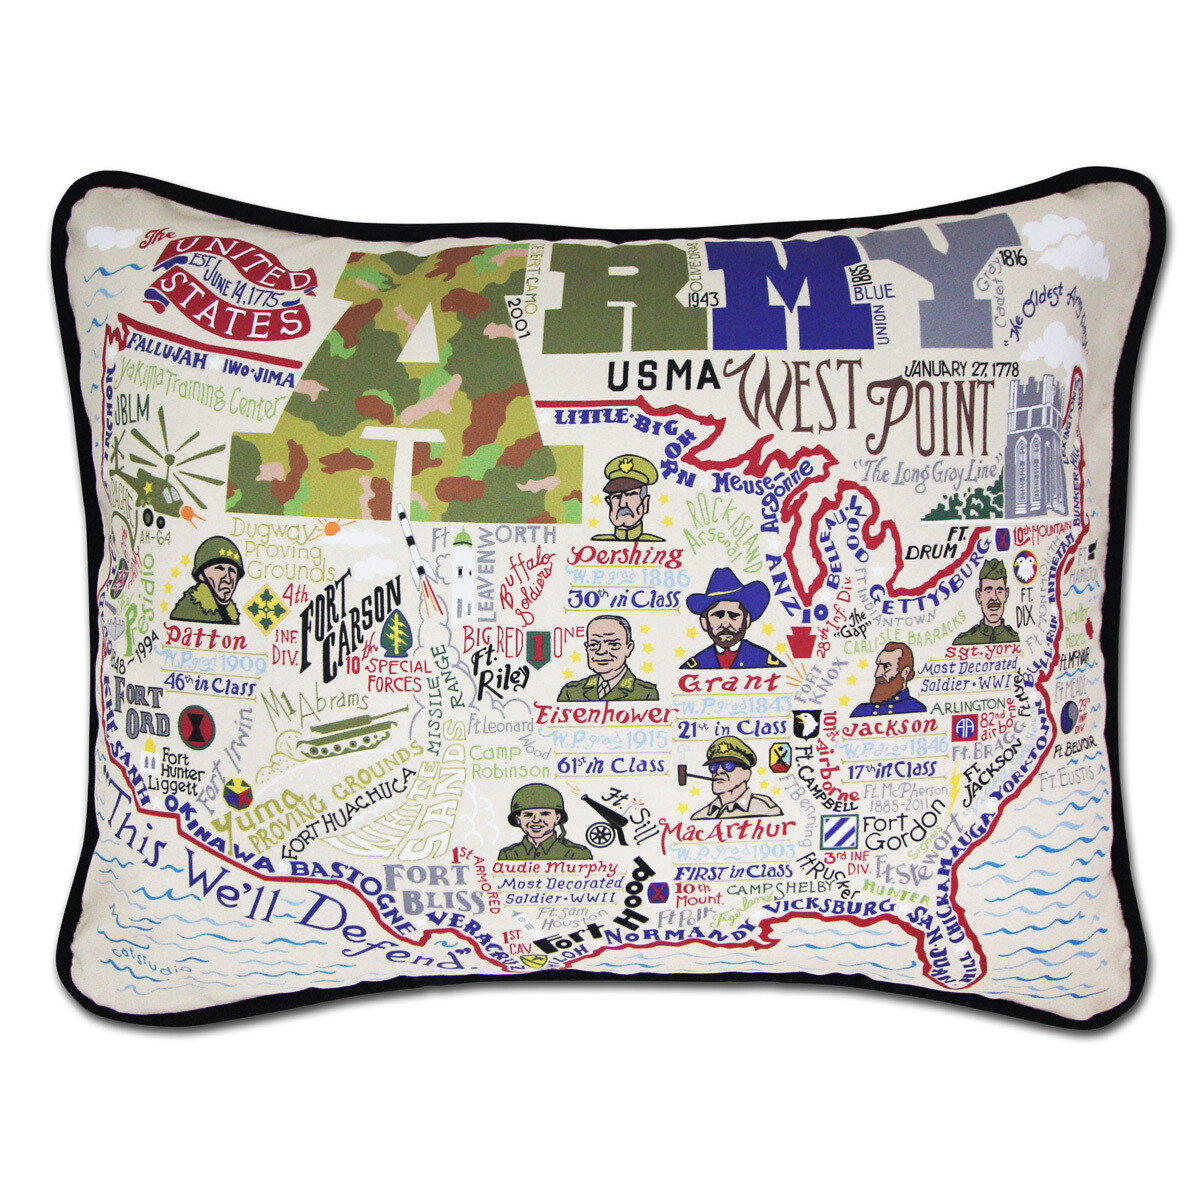 Army pillow